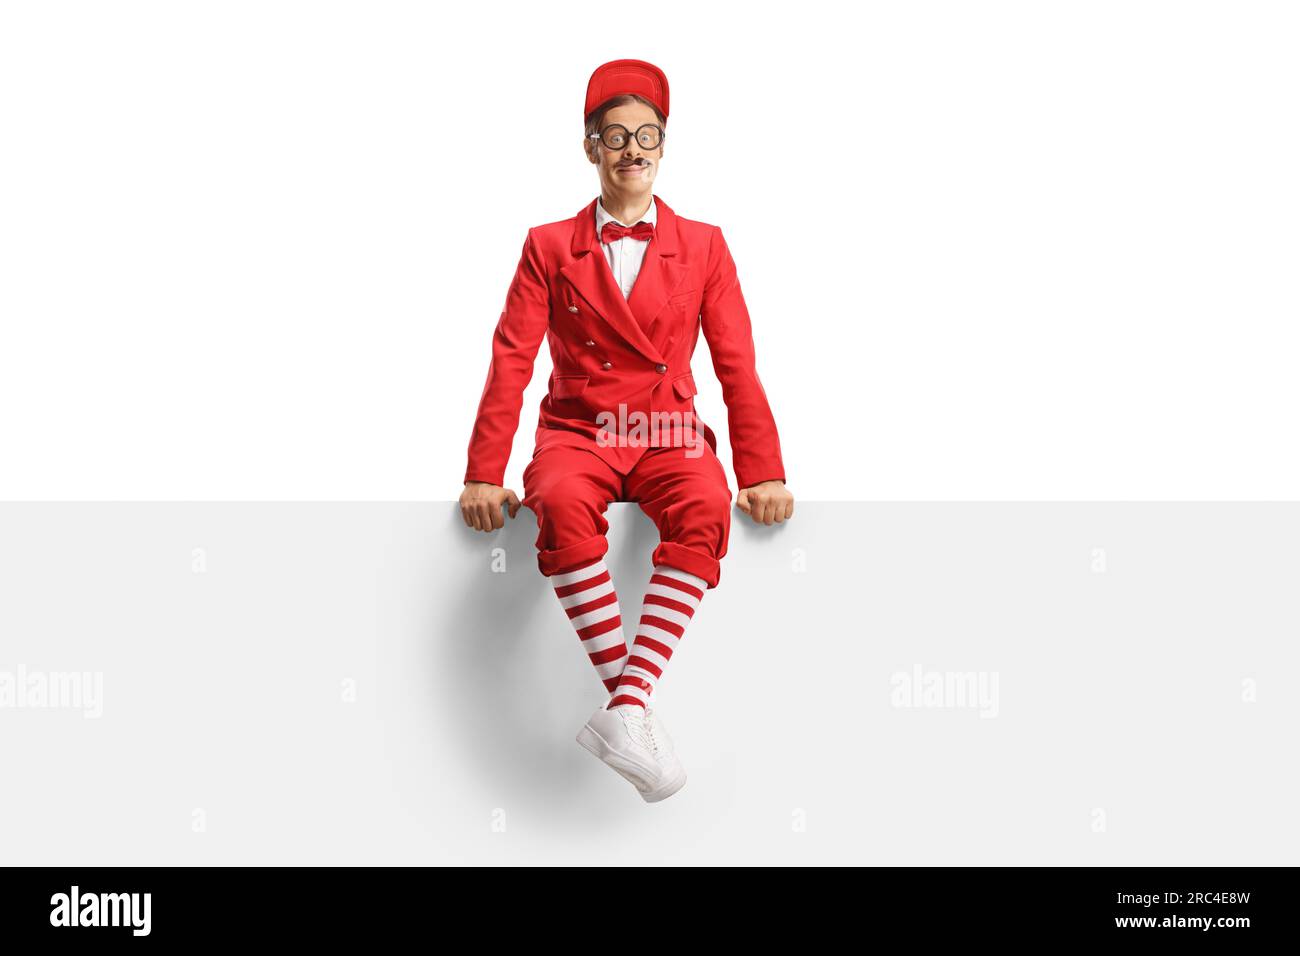 Entertainment performer in red suit sitting on a blank panel isolated on white background Stock Photo